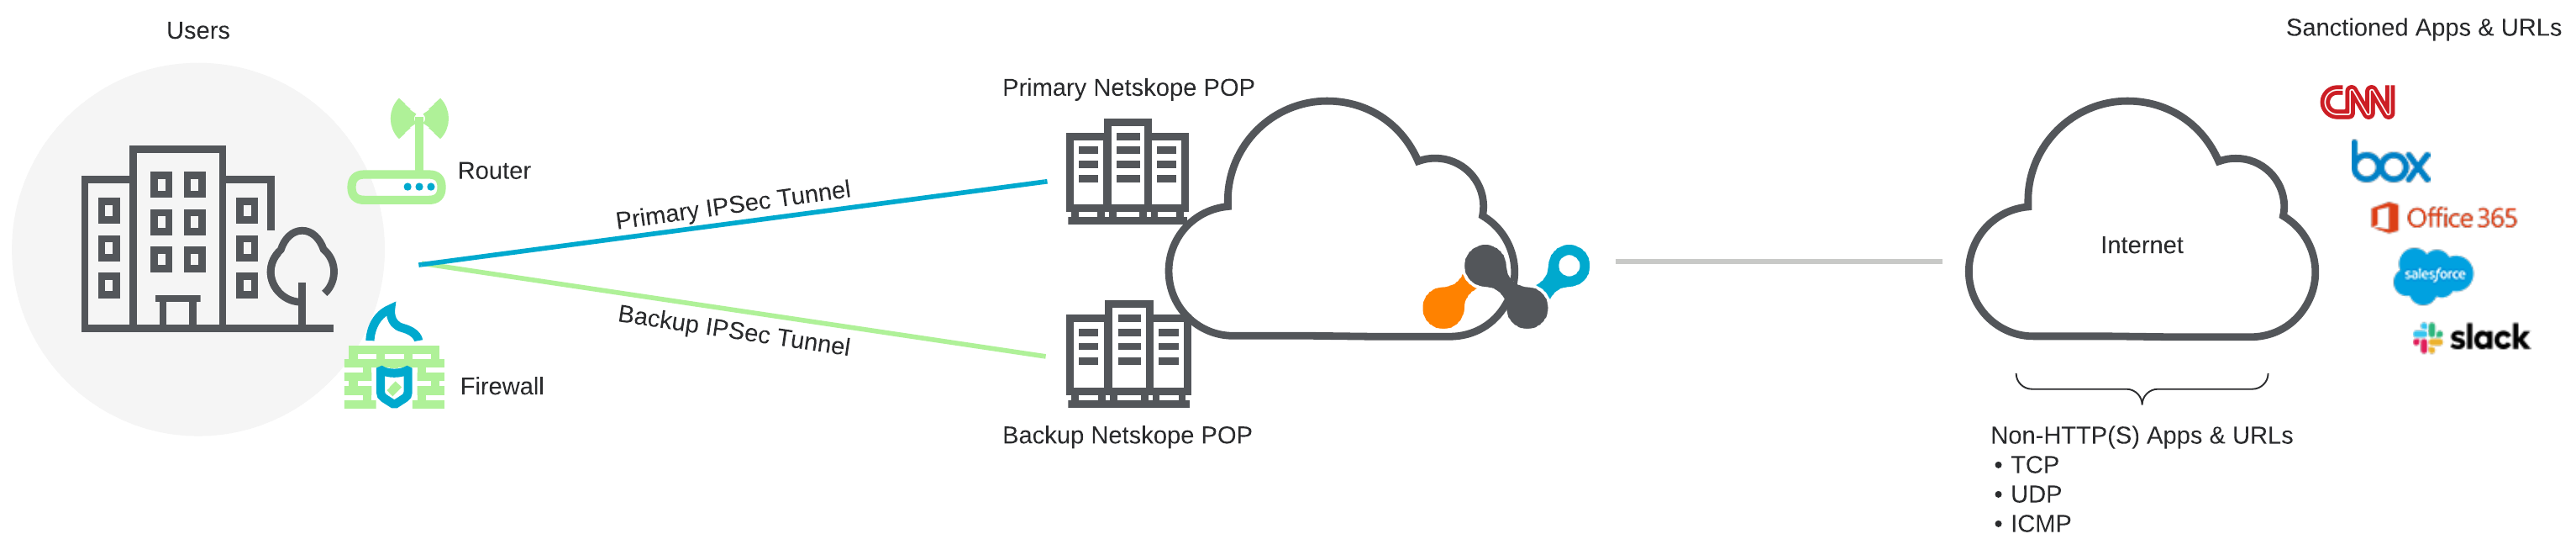 A network diagram showing the traffic workflow for IPSec Tunnels with Netskope Secure Web Gateway and Cloud Firewall.